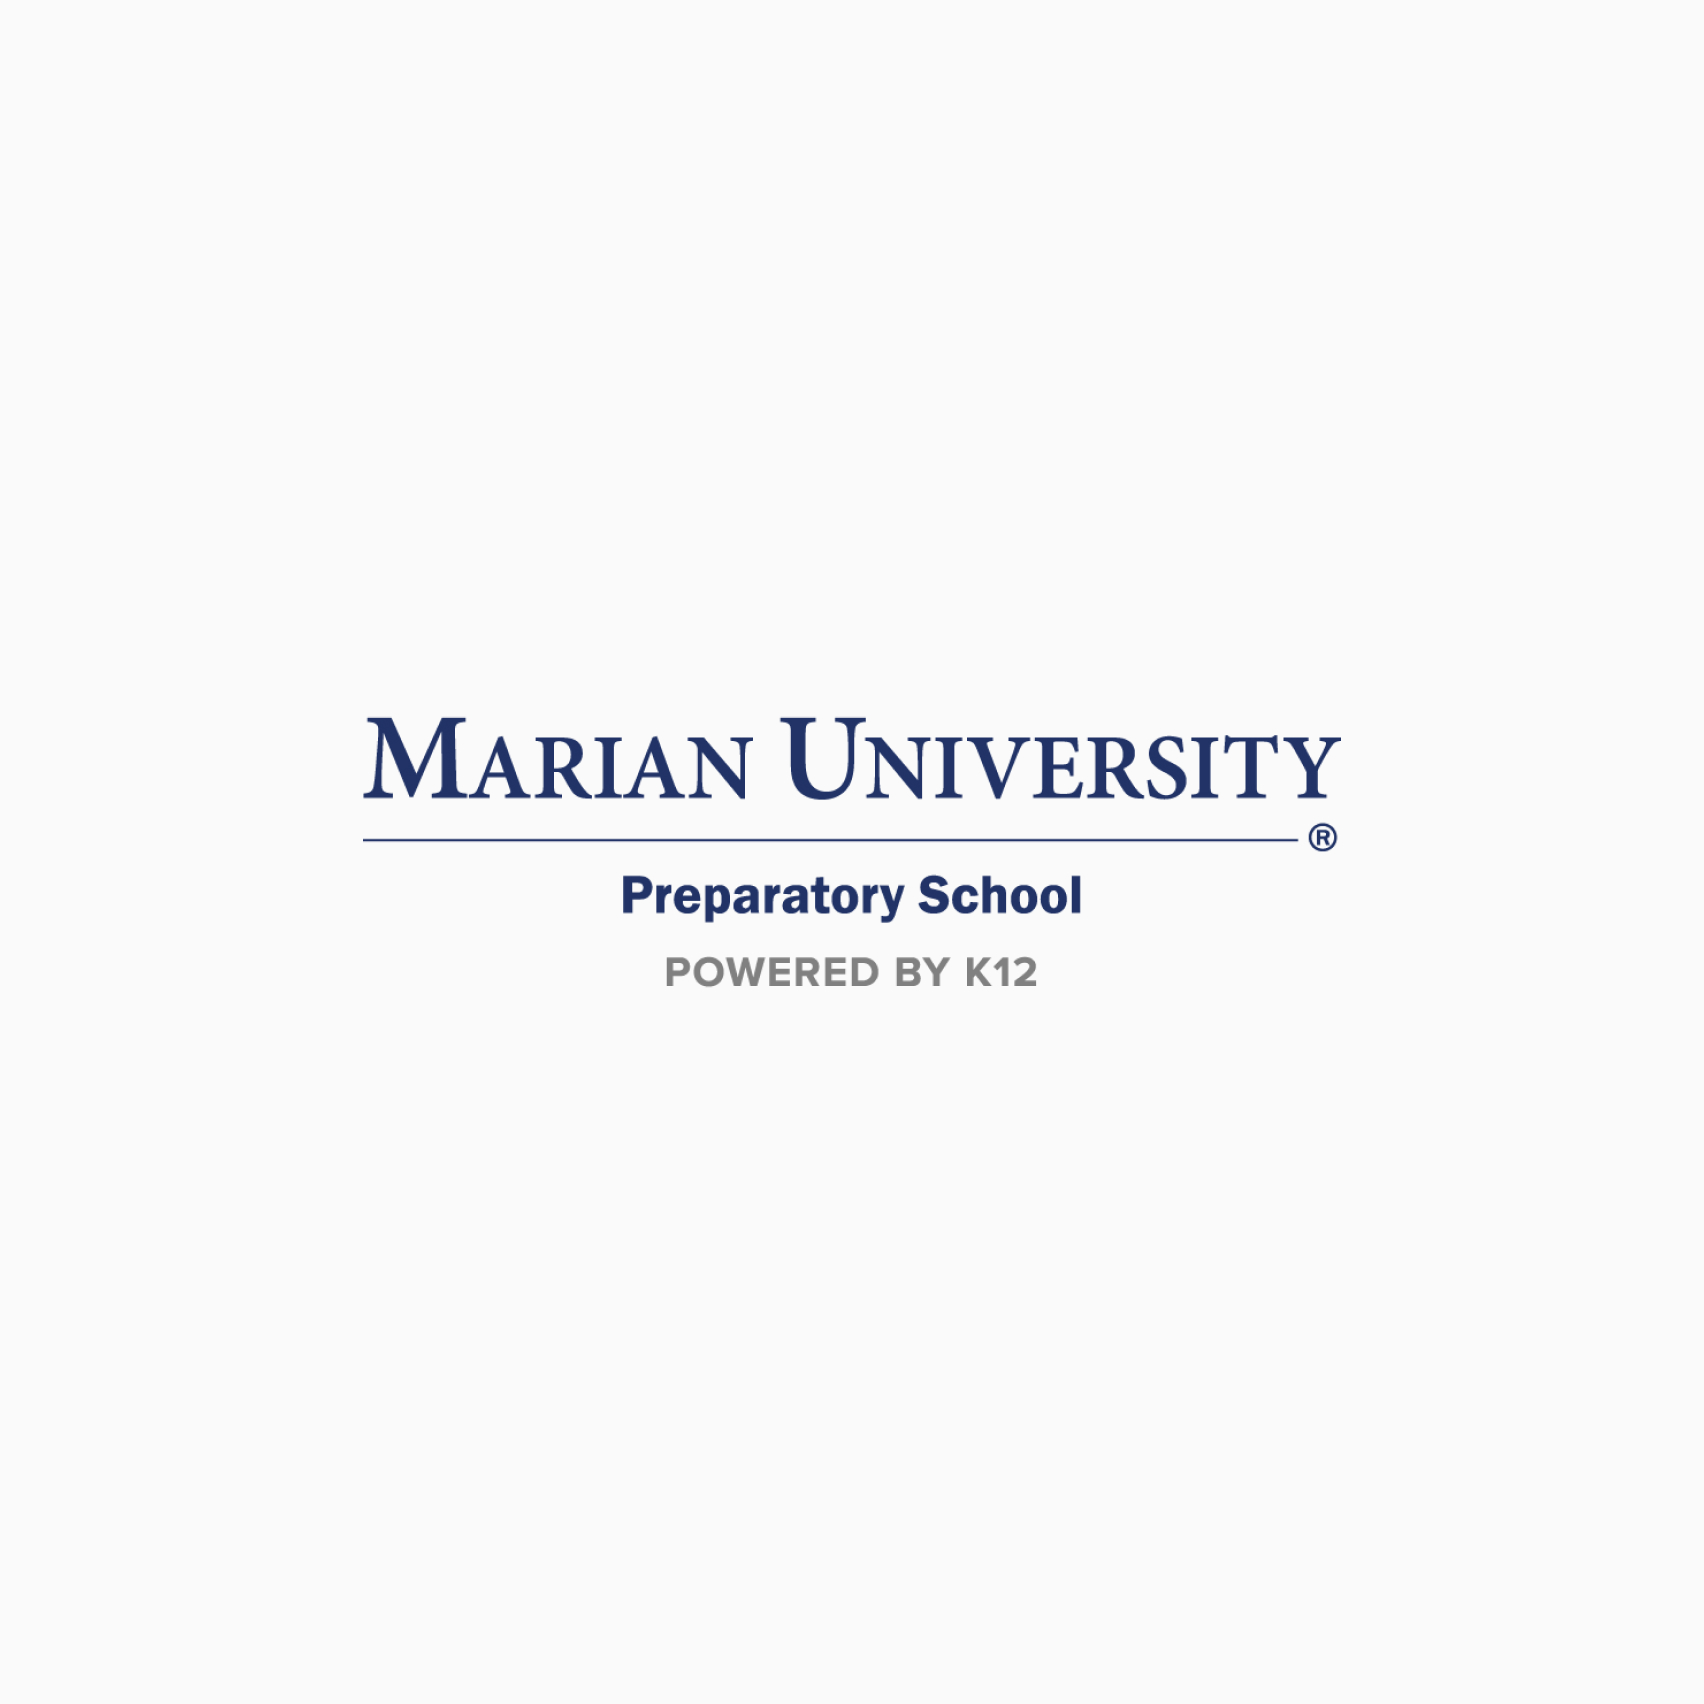 Online Private Schools image 17 (name Marian)